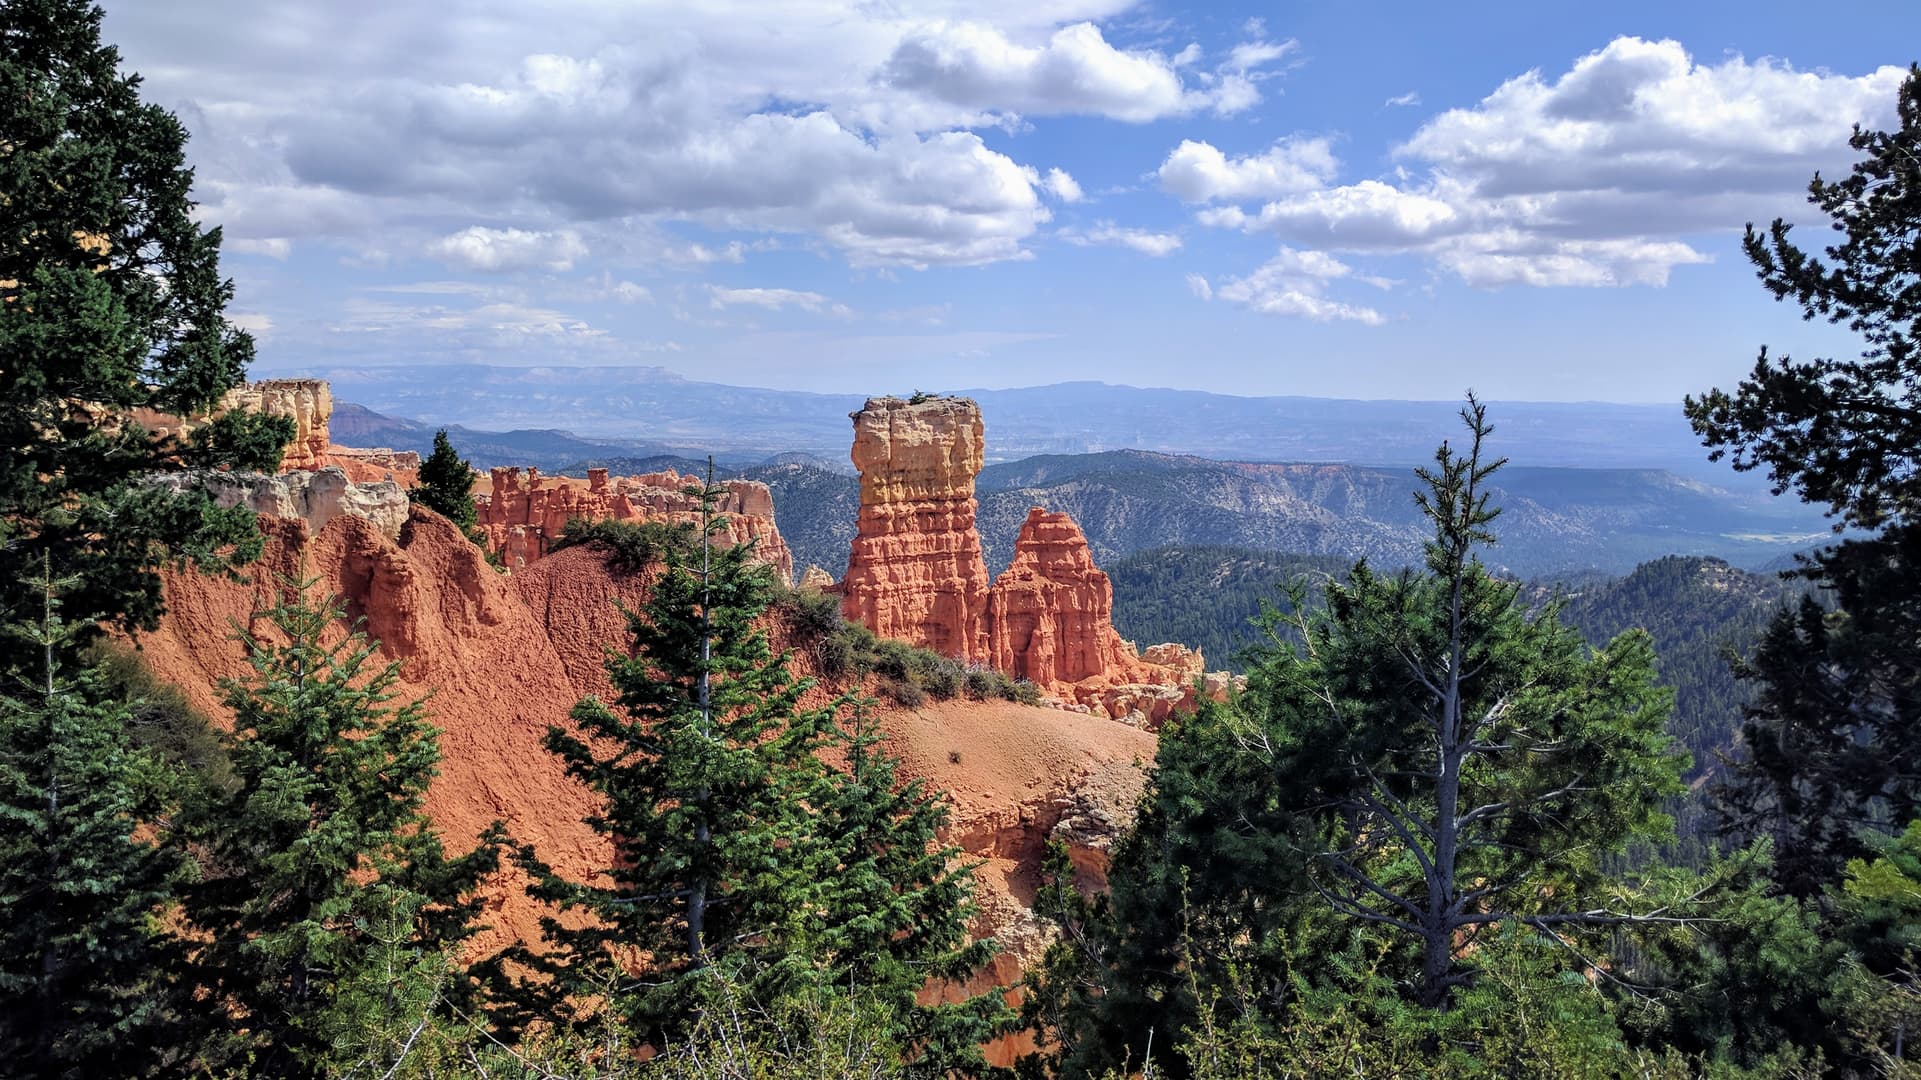 A fin of soft red and white rock extends from the South Wall of Bryce Canyon. It abruptly ends in two wide pillars of rock.